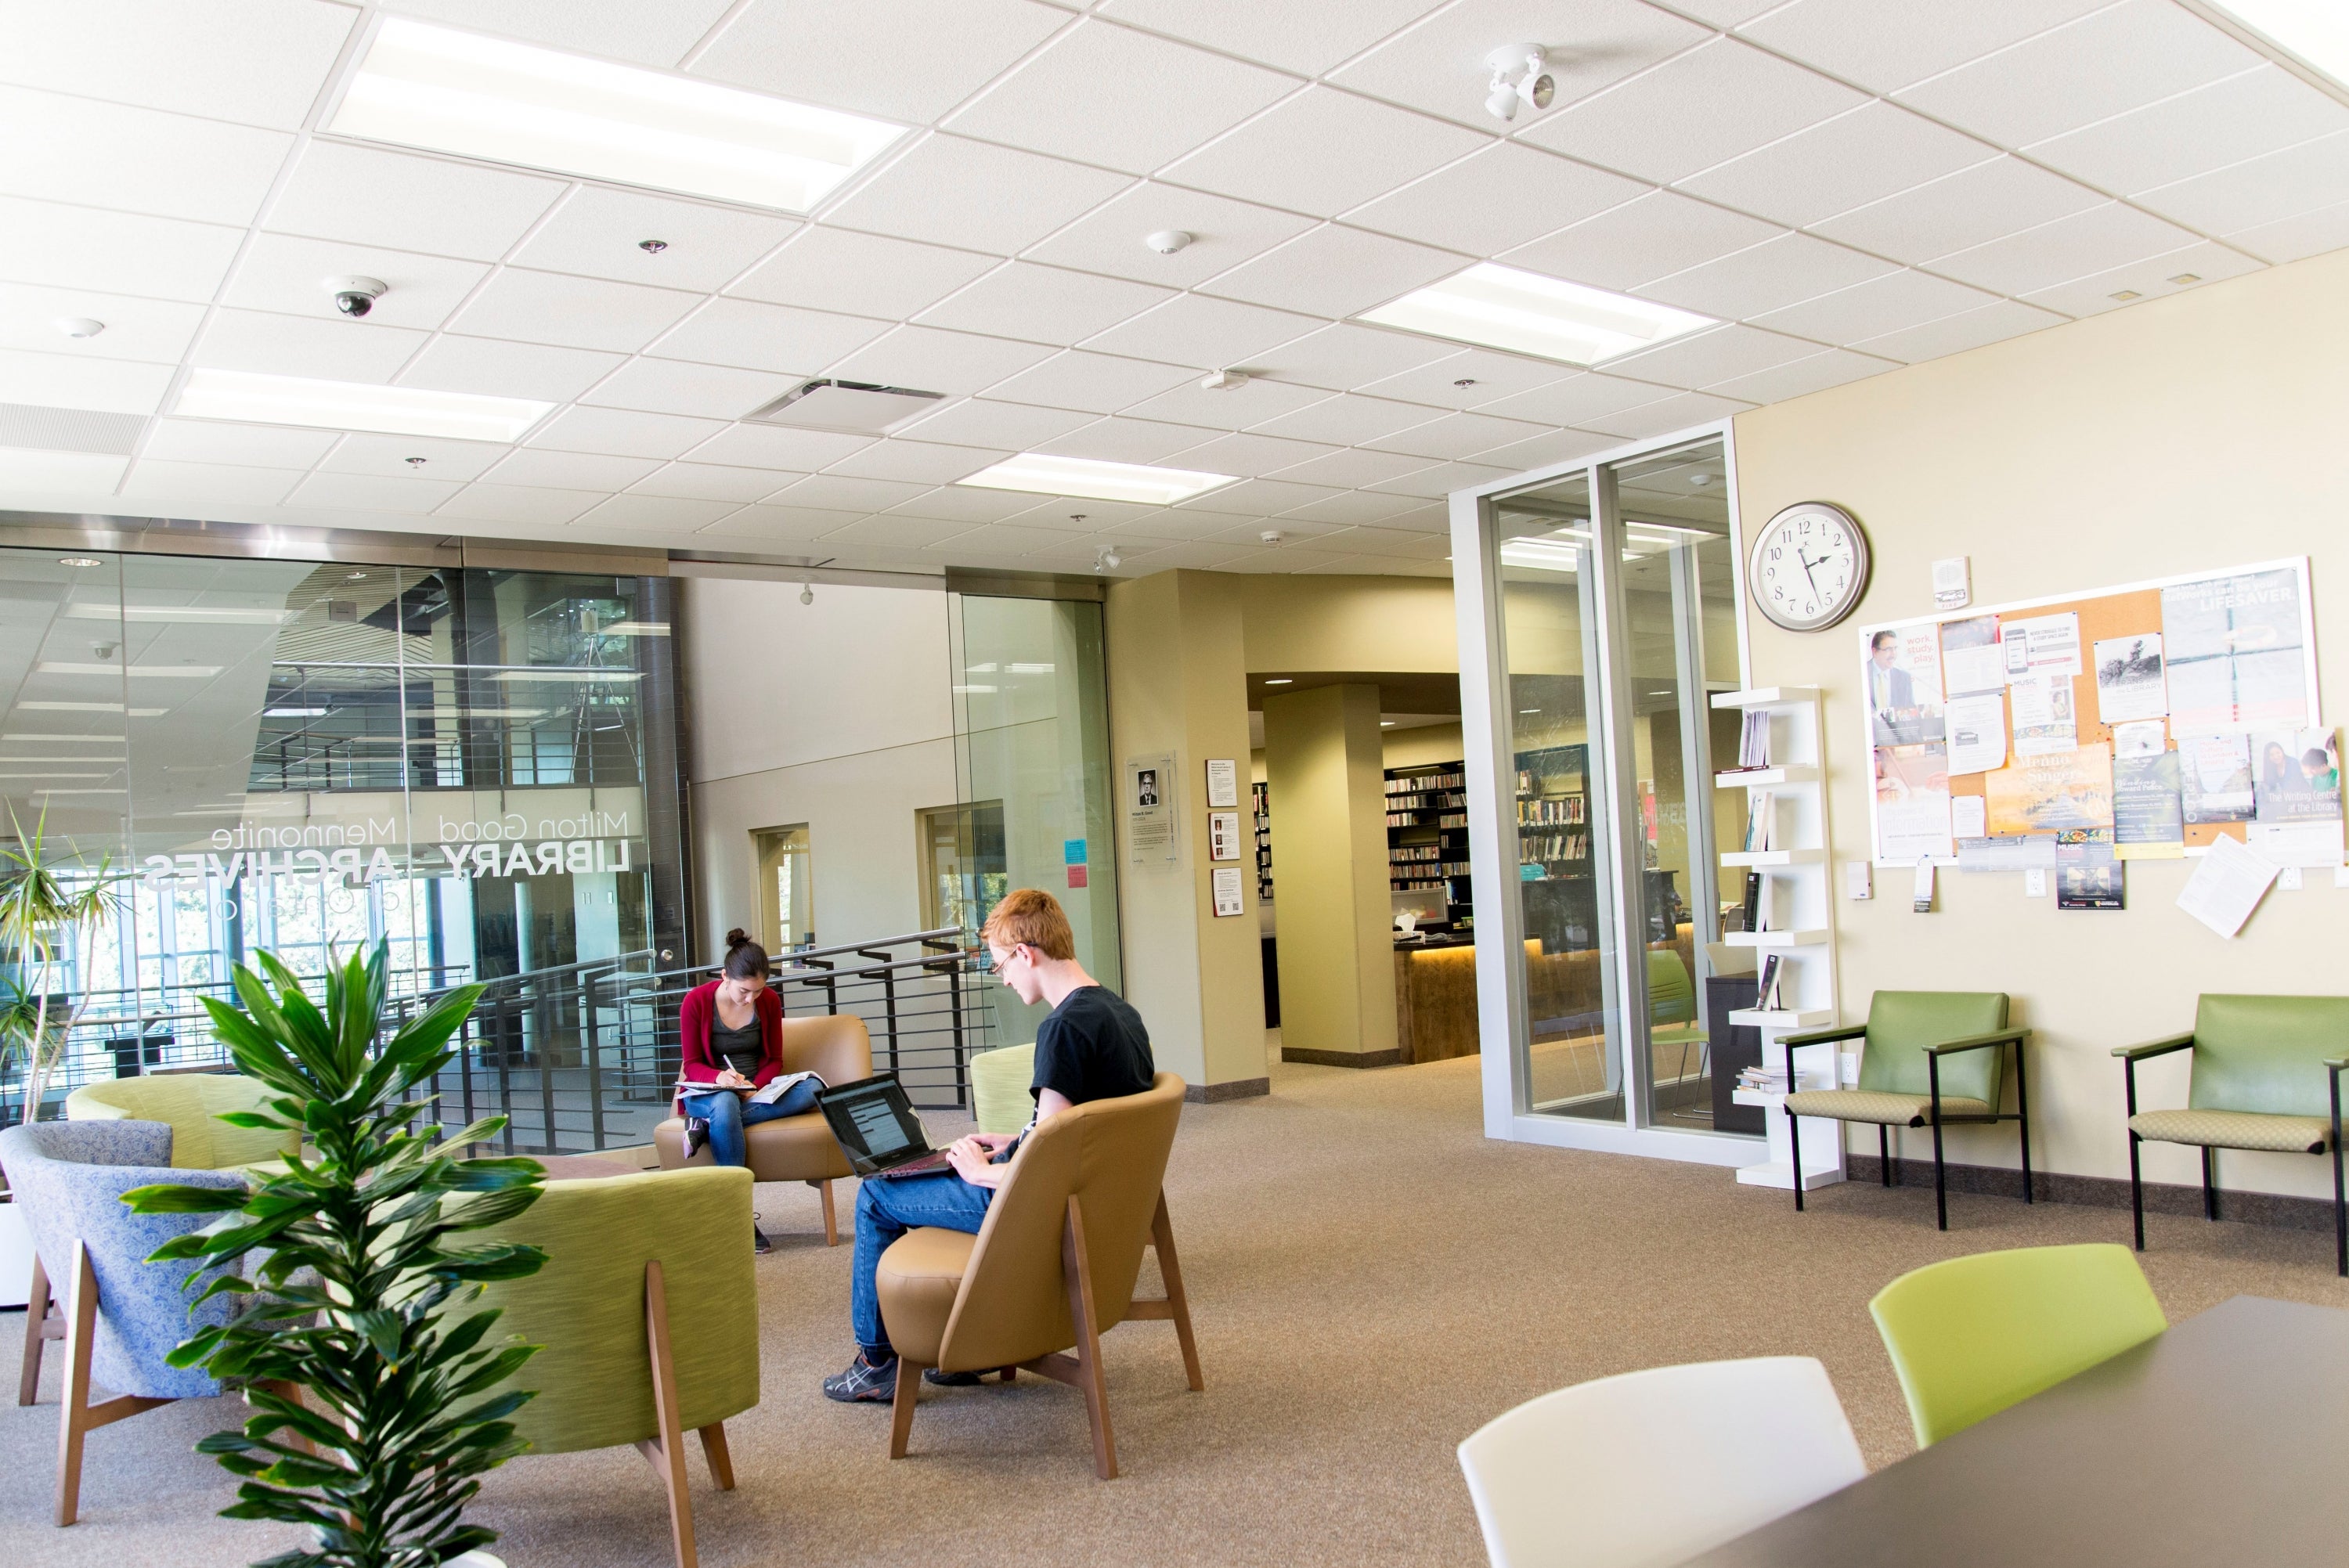 Students studying at the Grebel Library